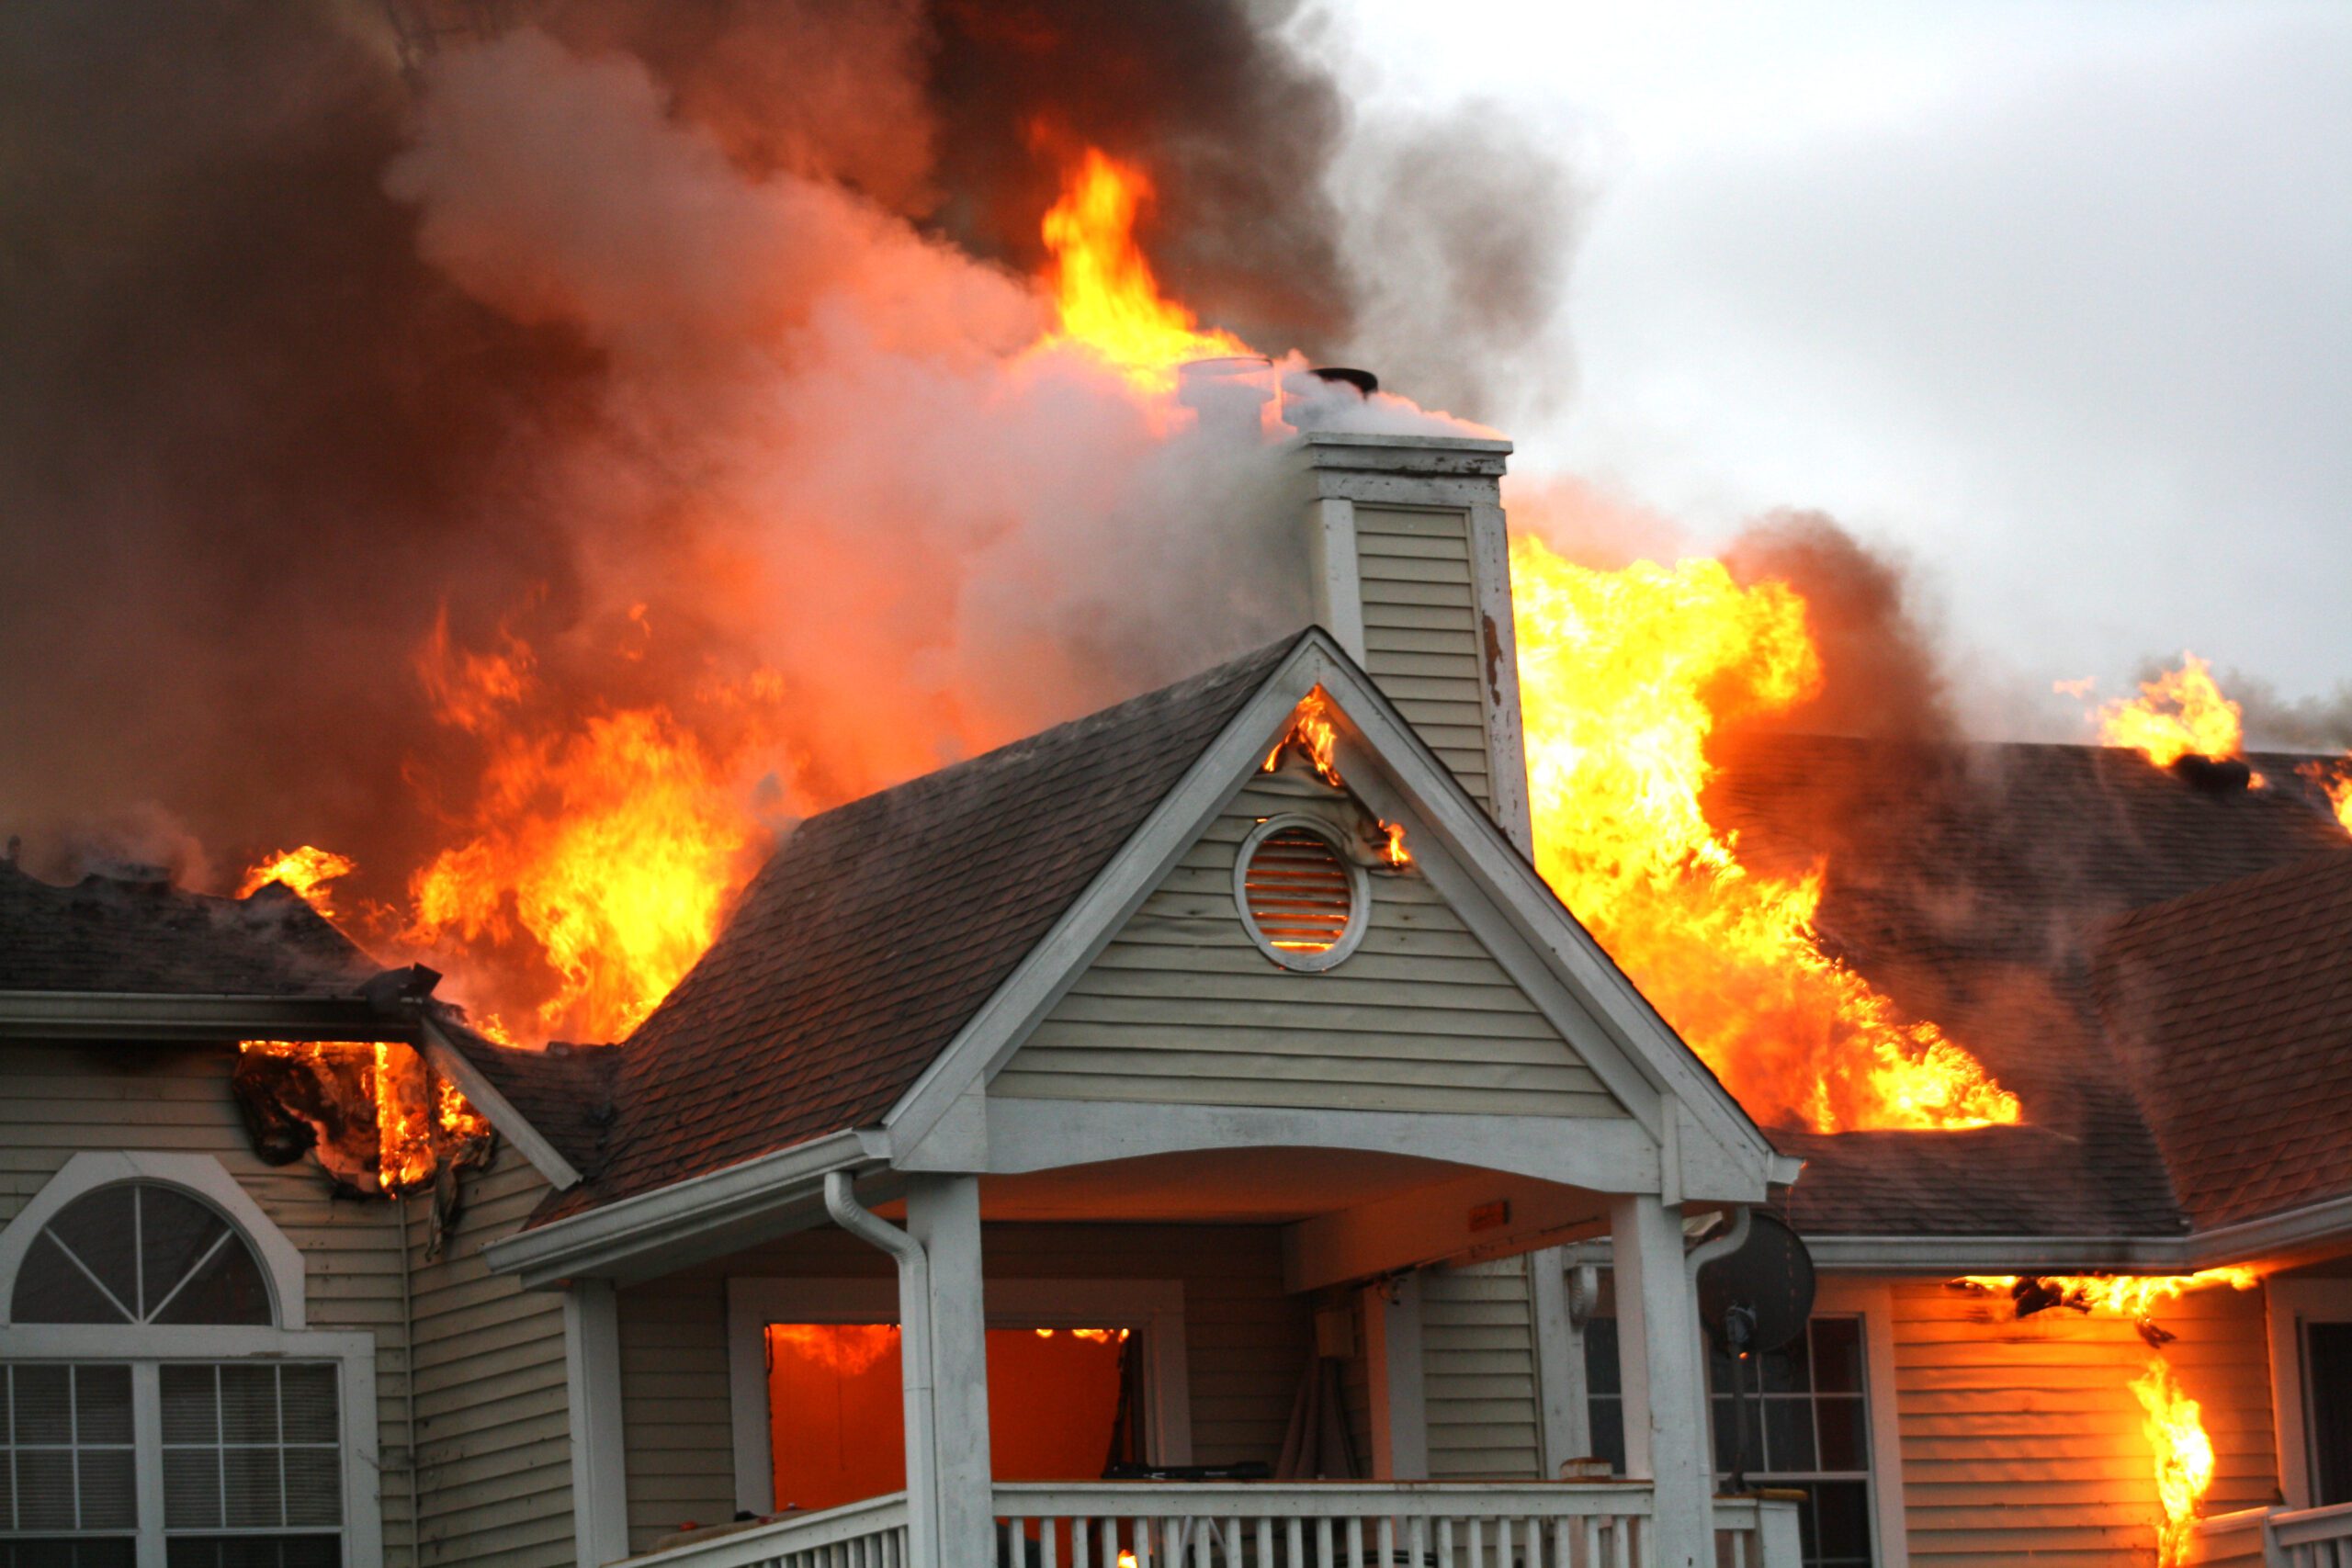 What To Do and Not Do After a House Fire